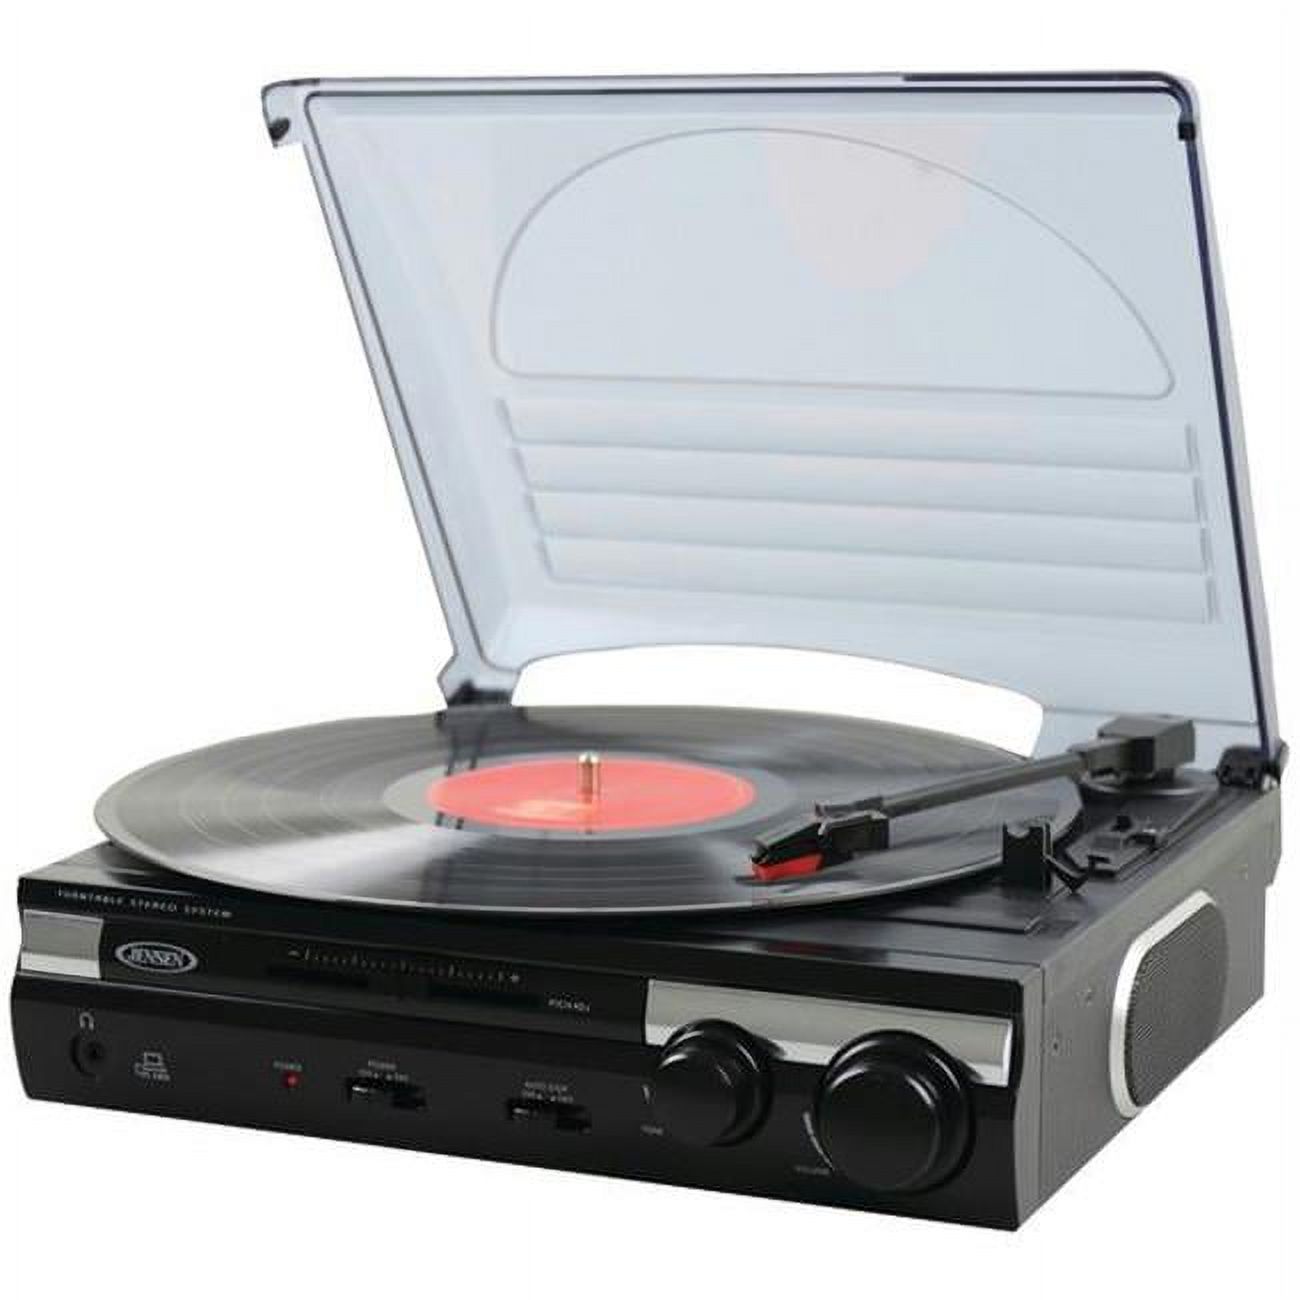 3-speed Stereo Turntable - image 1 of 1